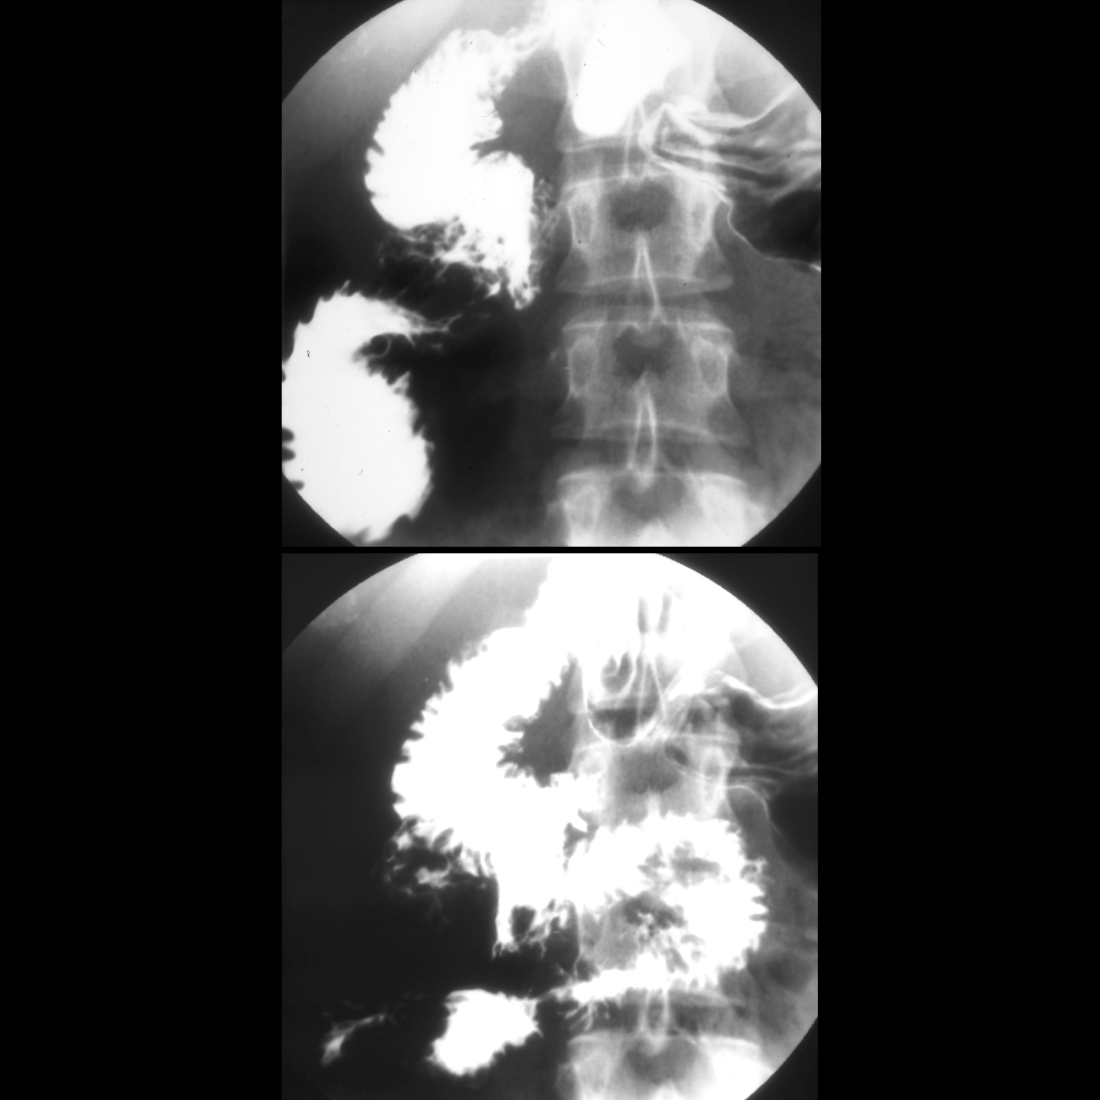 Teenager with chronic vomiting